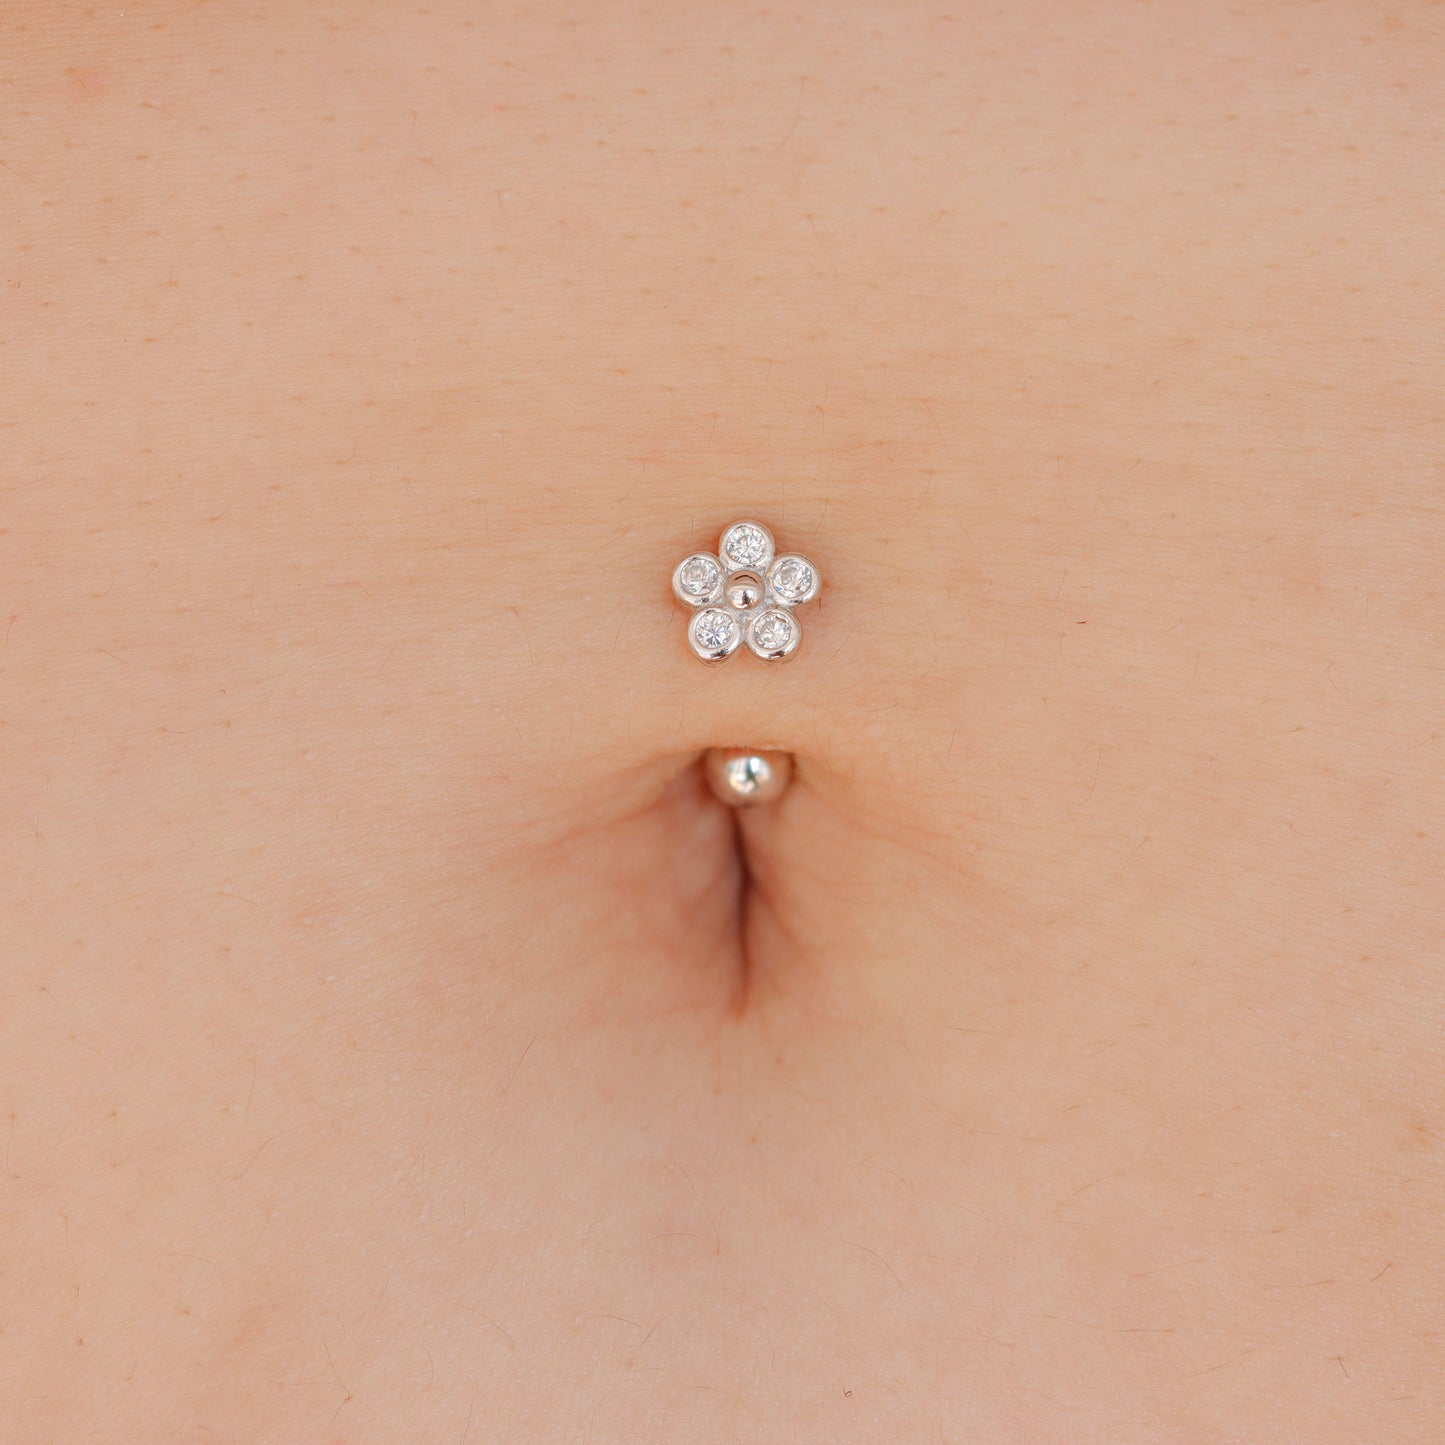 Solid 925 Silver | 16G 14G Round Flower Reverse Belly Ring | 6mm 1/4" 8mm 5/16" 10mm 3/8"